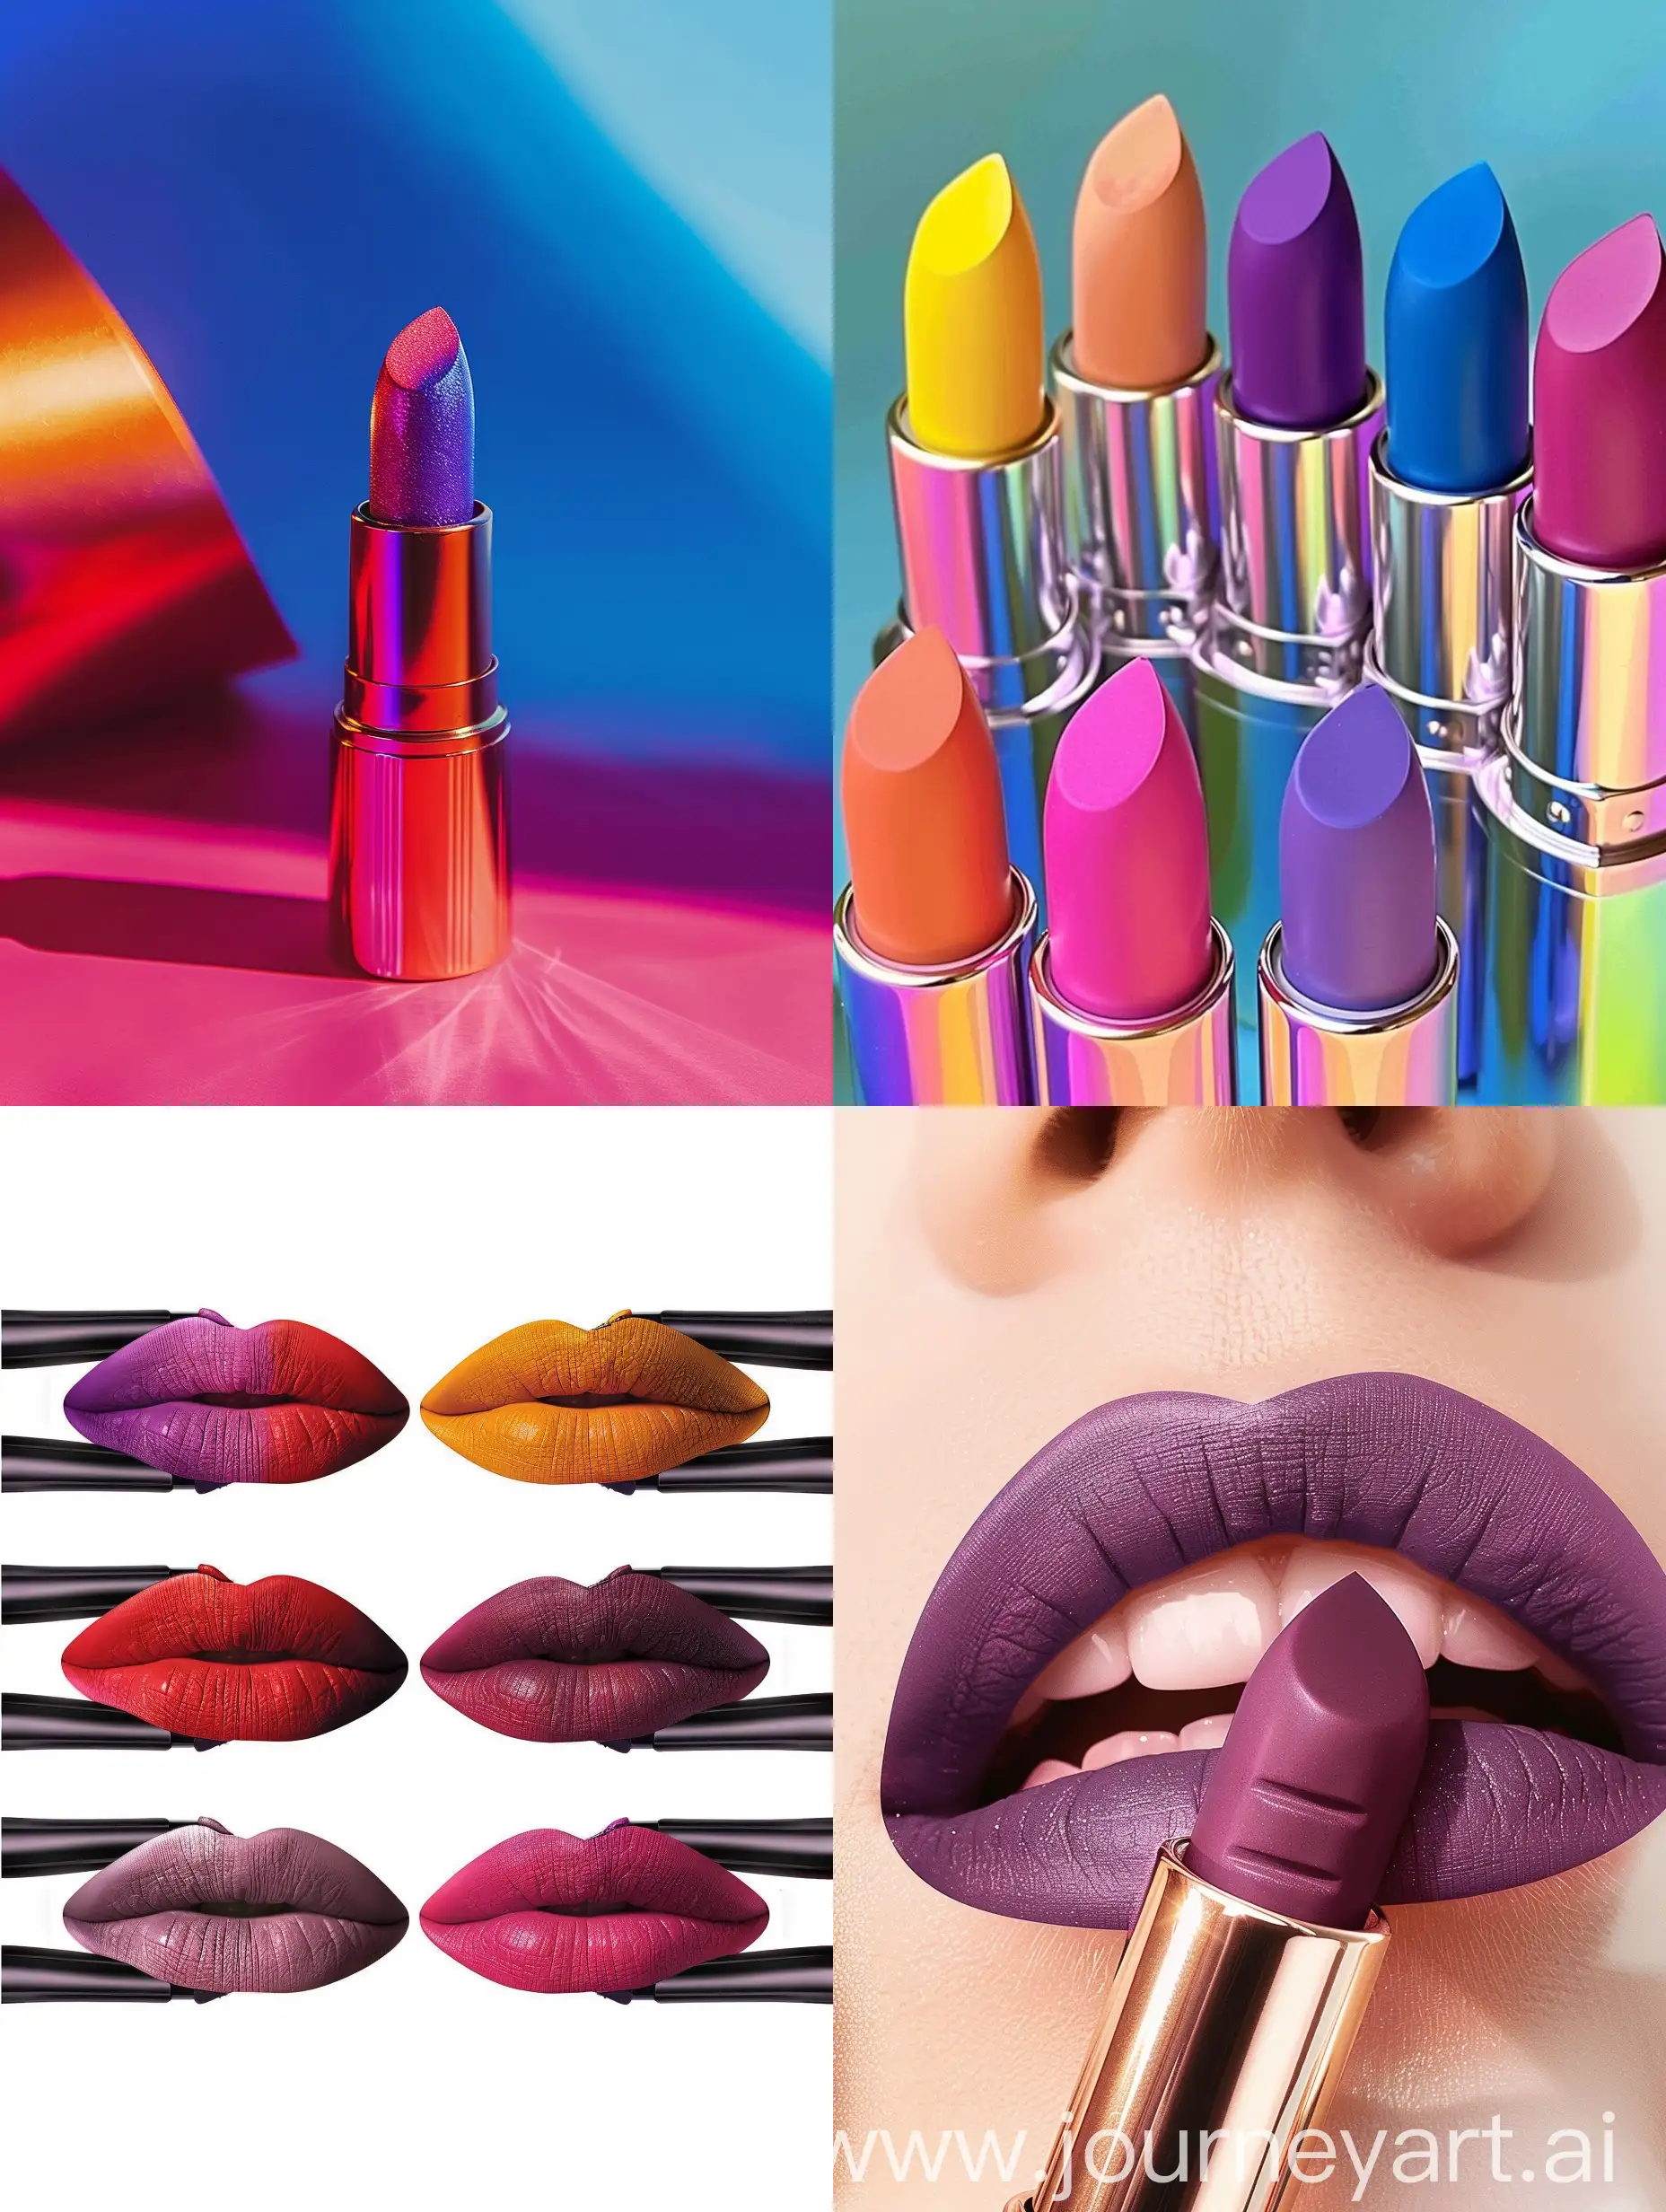 🌟 Unleash Your Unique Charm! 🌟
New lipstick, vibrant and colorful. Showcase confidence, unique beauty. Starting today, own our exclusive formula lipstick, radiate personality, bask in your brilliance!
💄 High-quality formula, long-lasting color 💋 Rich color range, catering to multiple styles 💫 Soft texture, easy application, no smudging
Embrace and showcase your unique charm, starting from the lips, exude boundless confidence!
Makeup #LipstickLover #ConfidenceRevealed